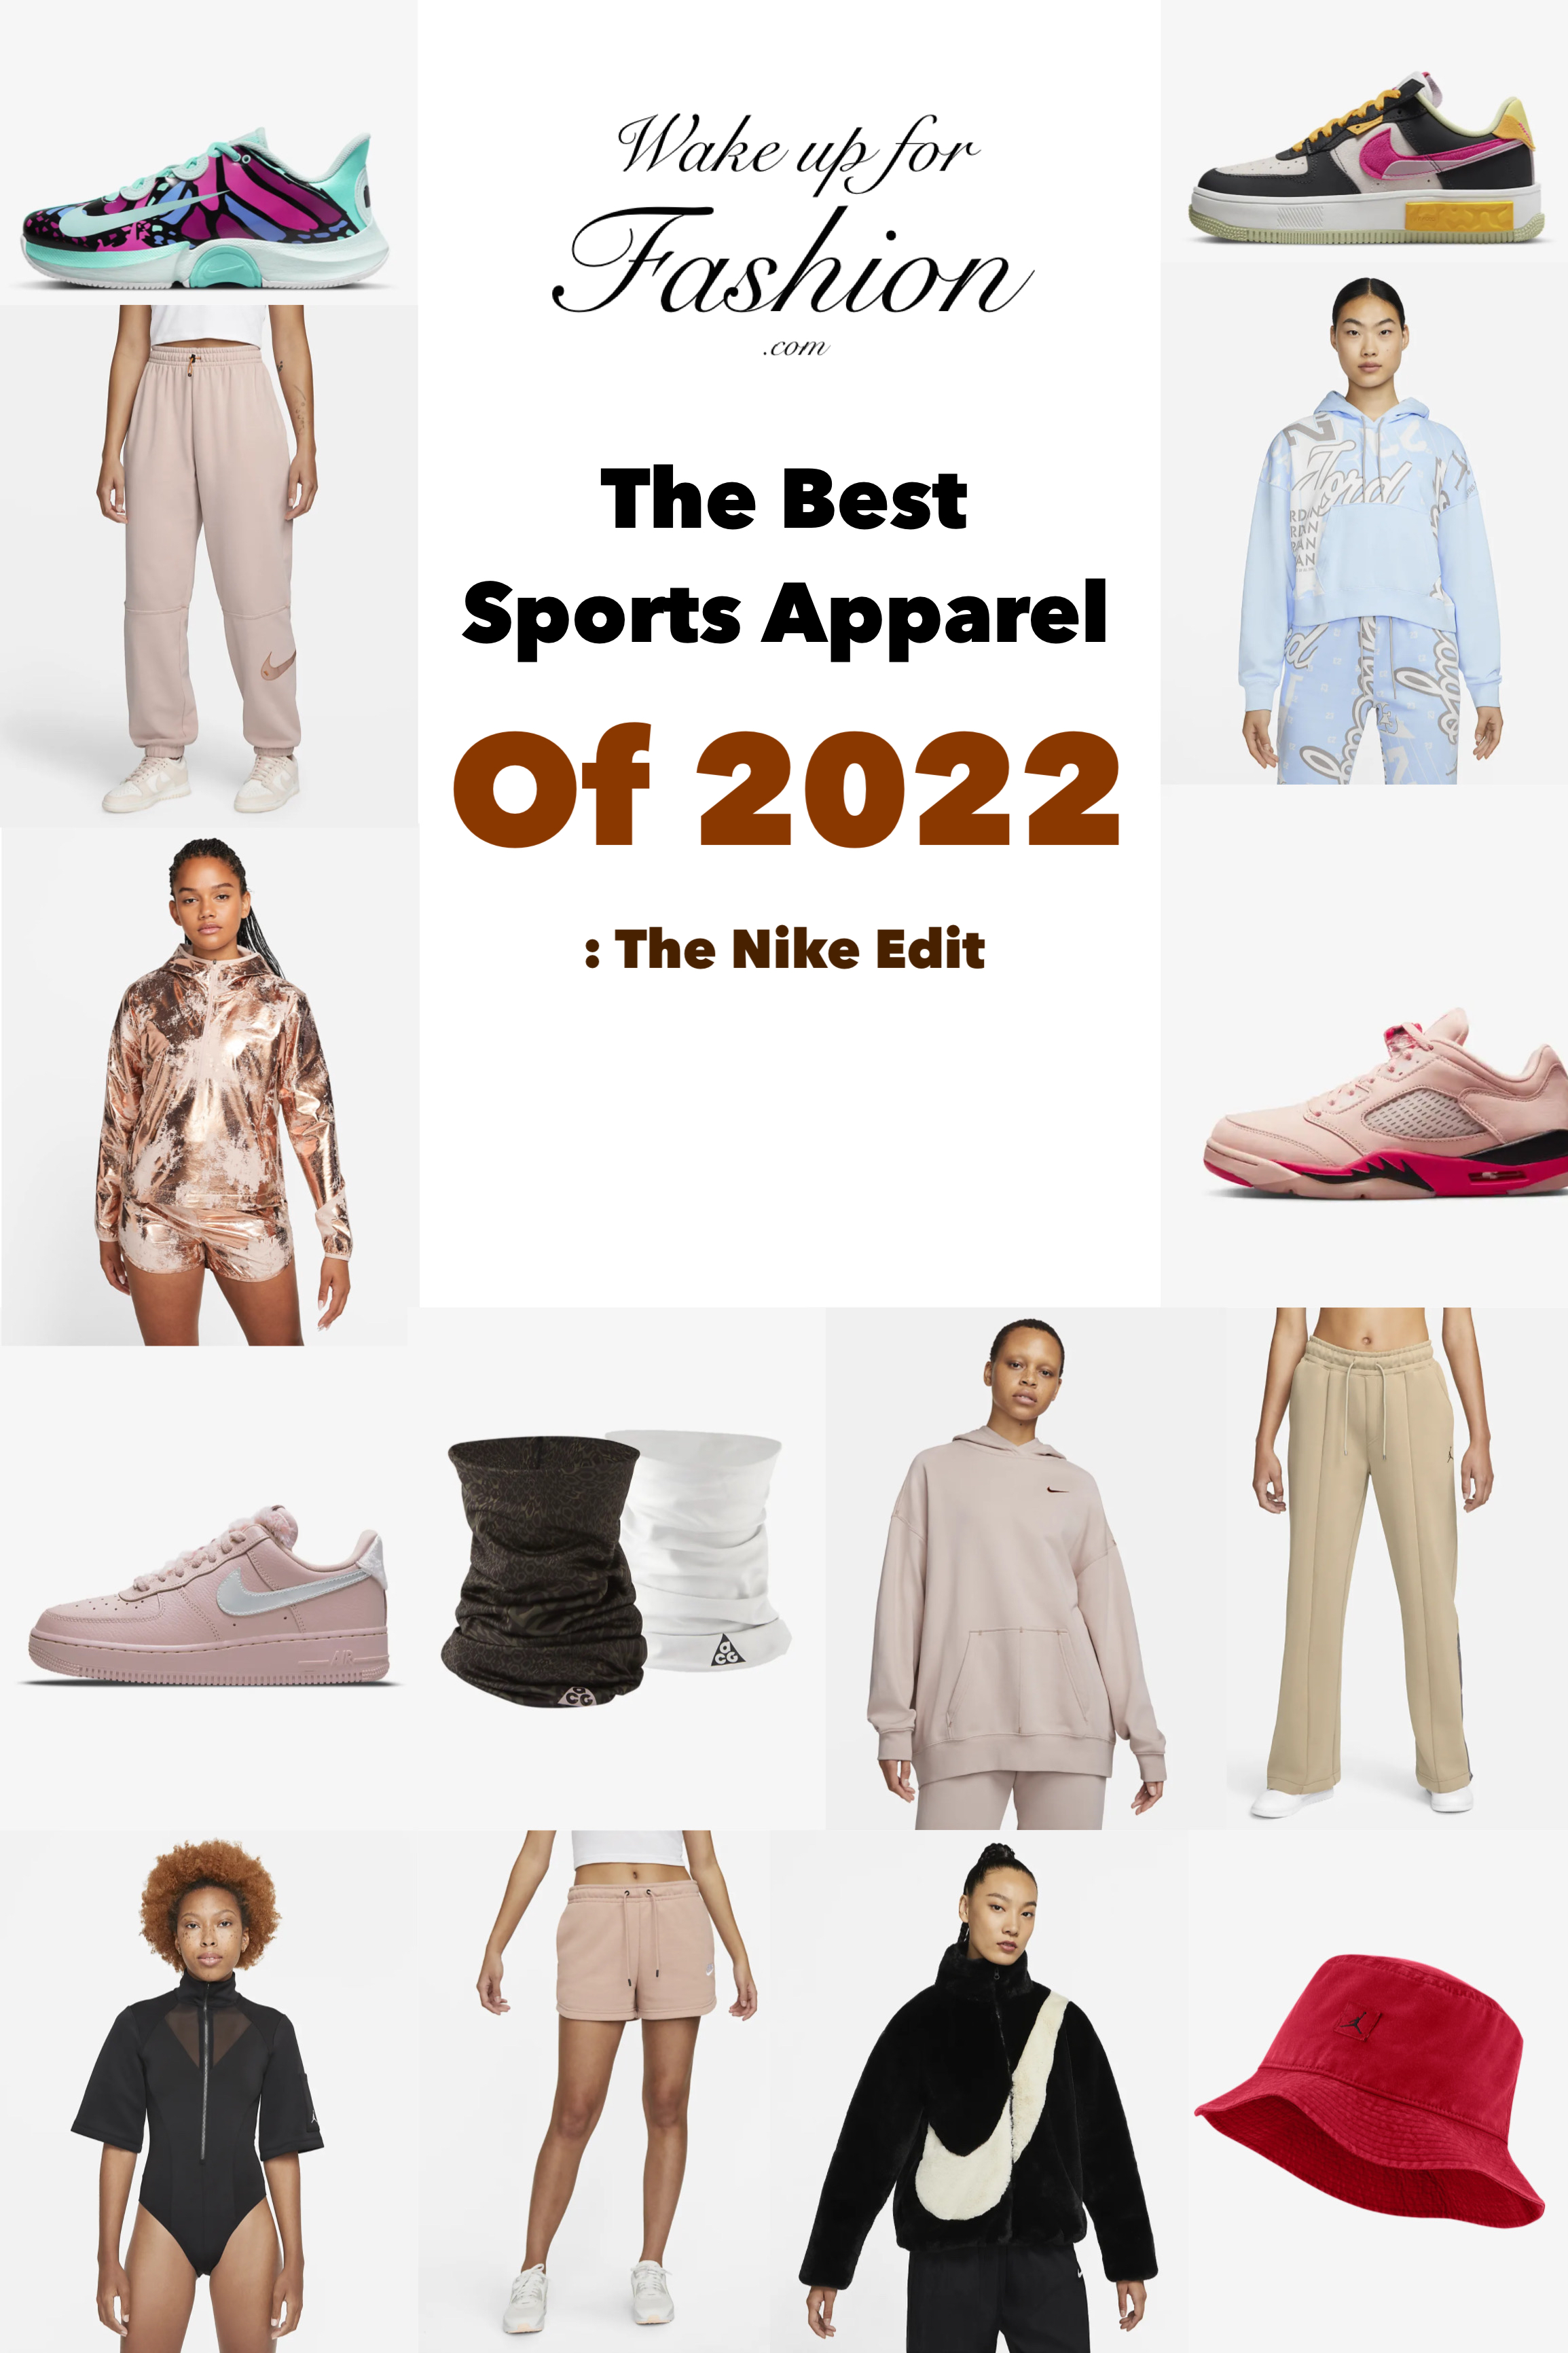 The best ike sports apparel of 2022